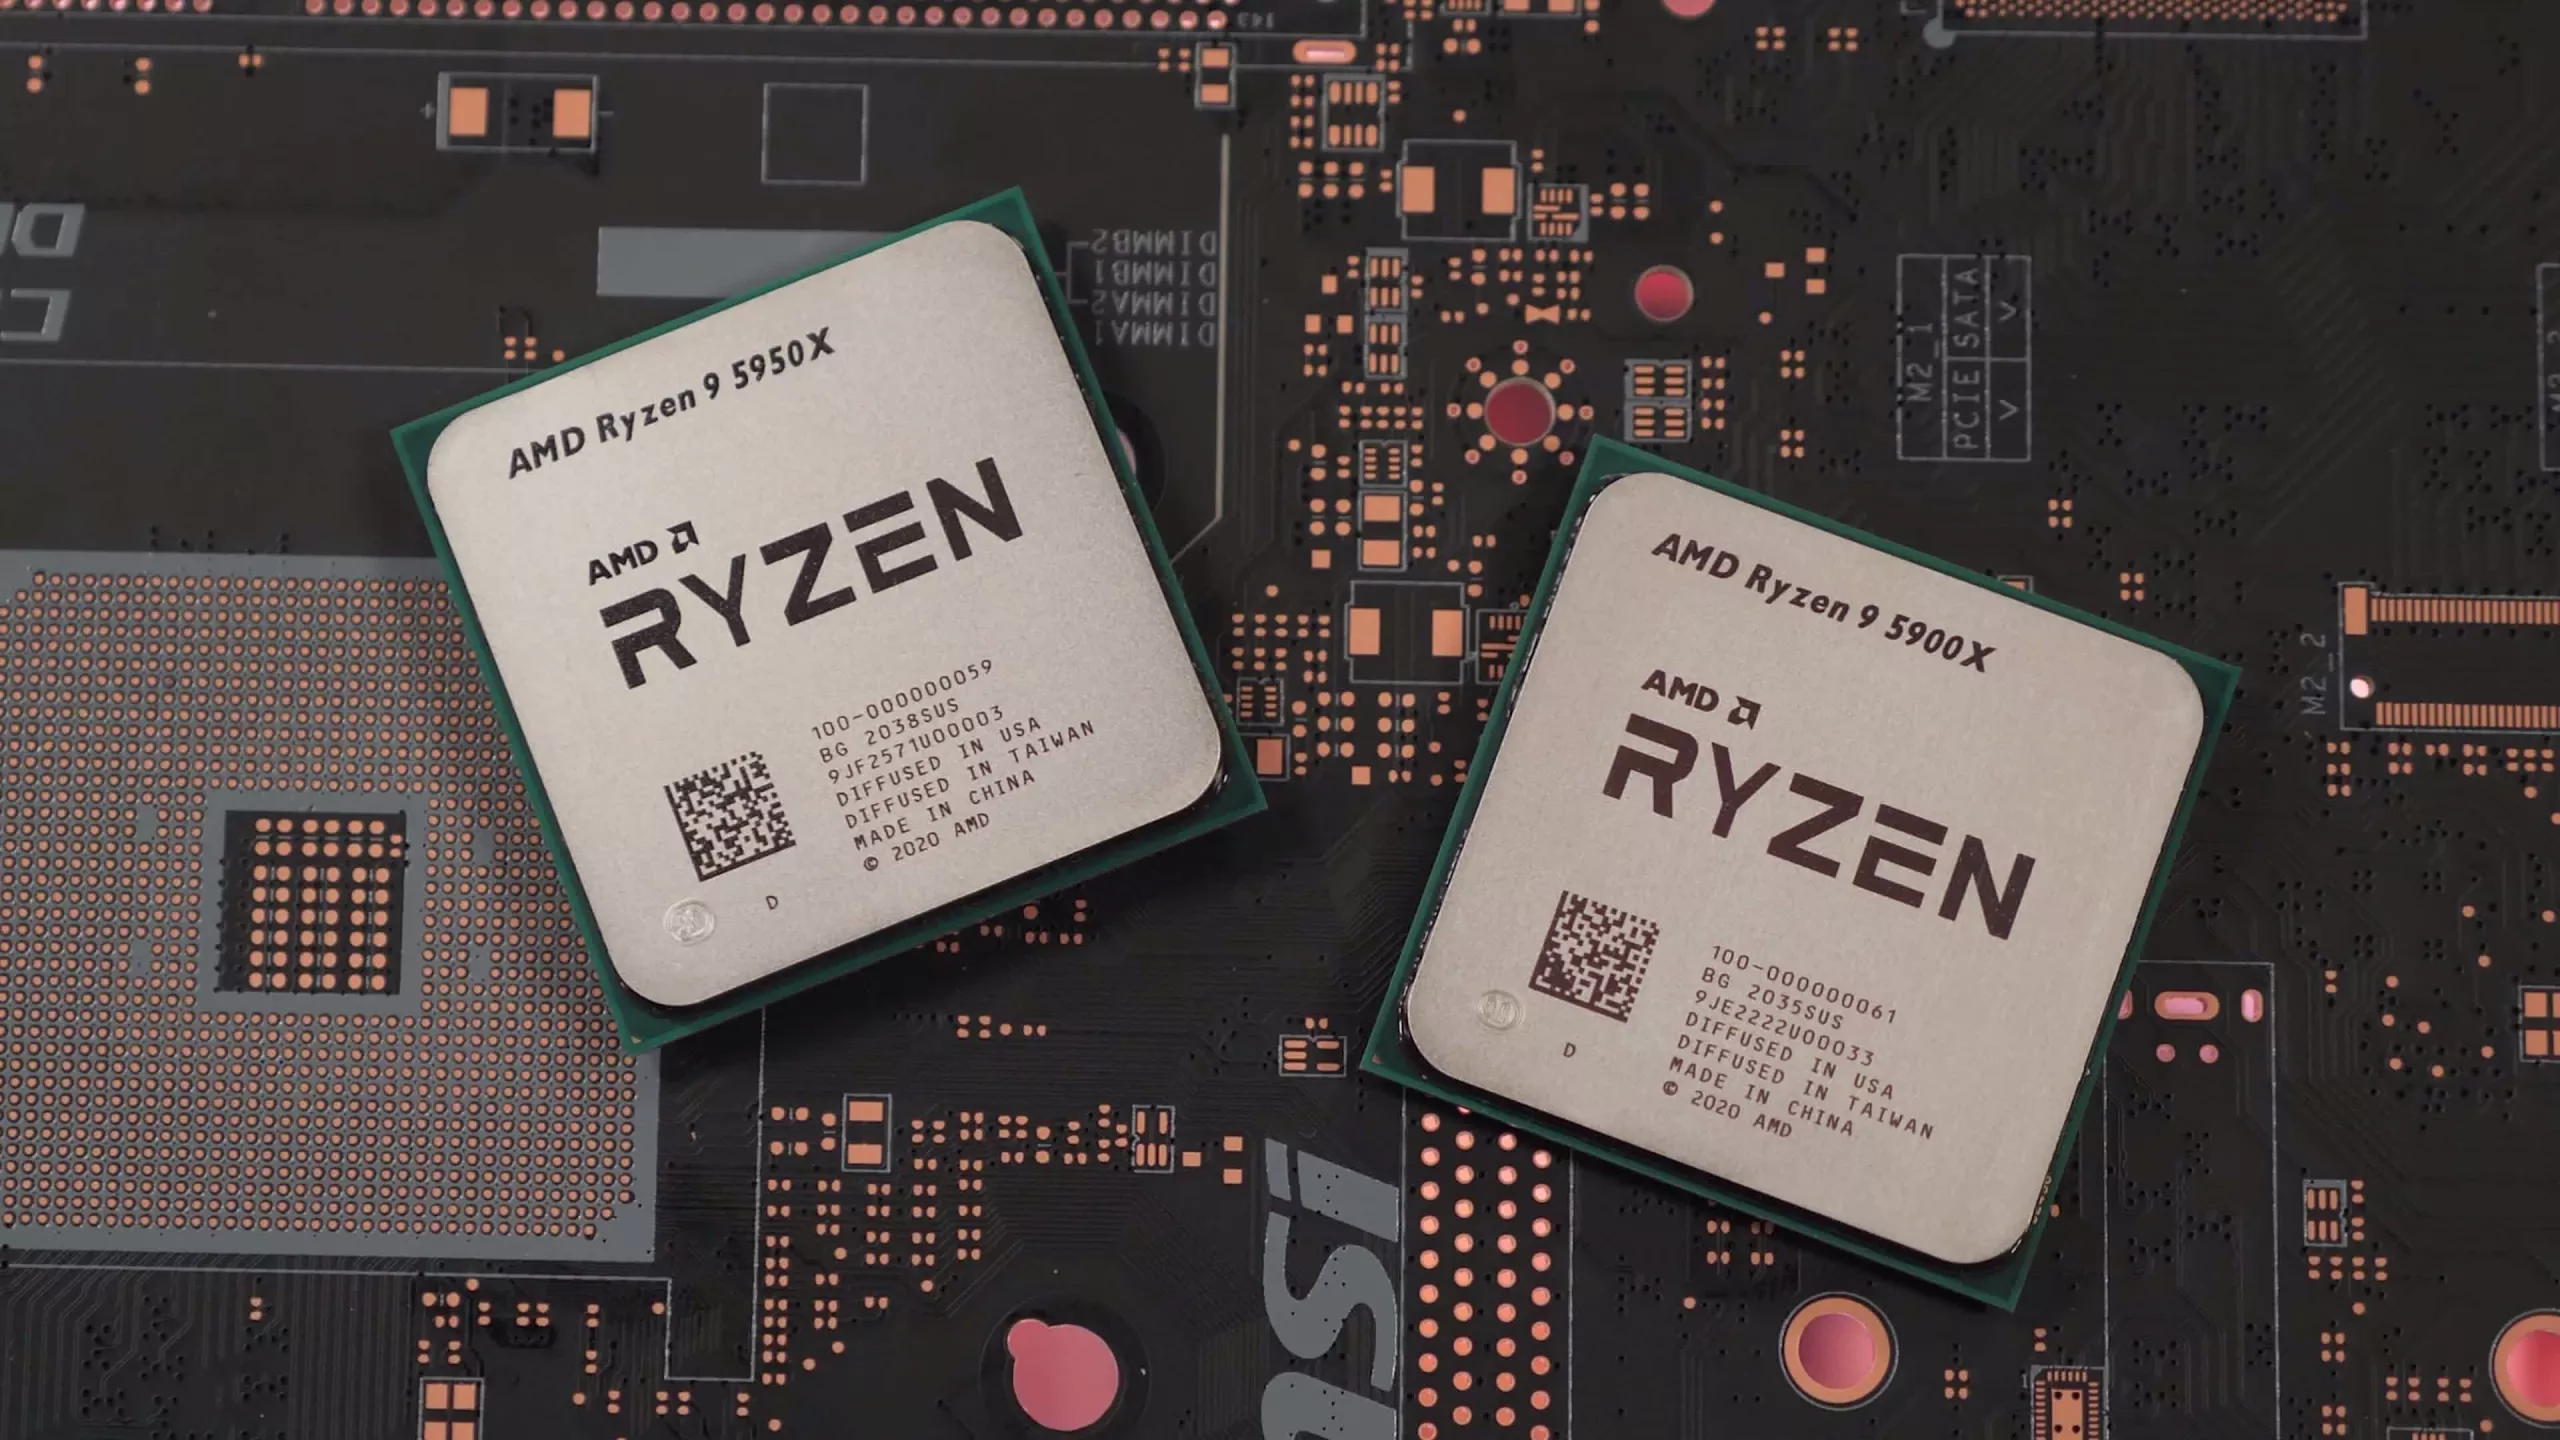 Ryzen 5000 CPU support is coming to 400 series chipsets sooner than expected